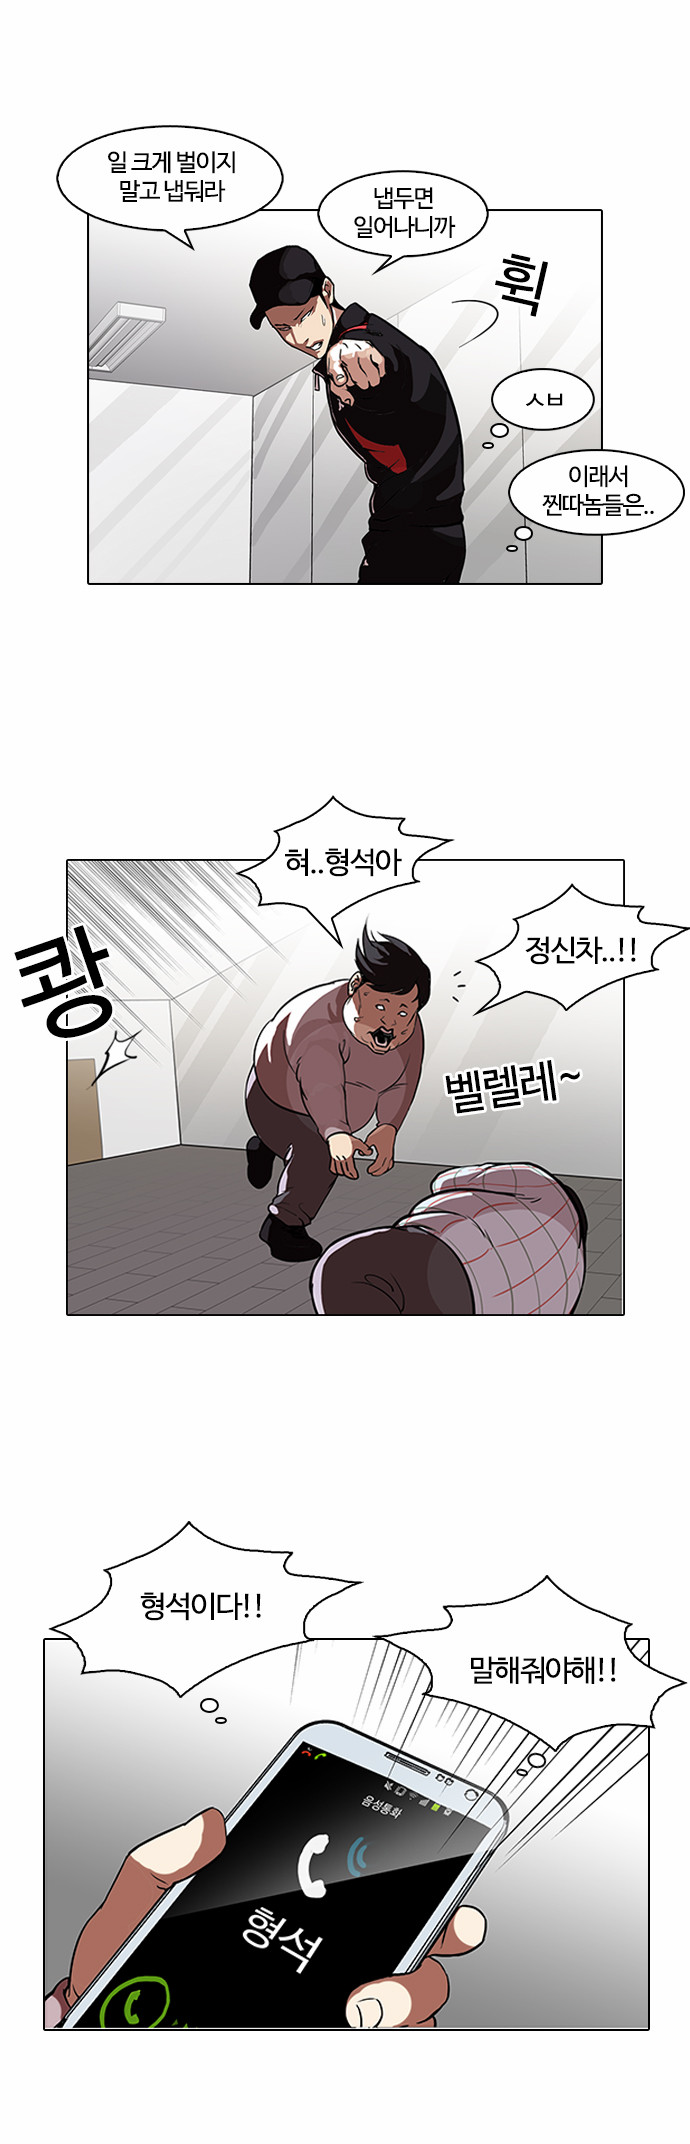 Lookism - Chapter 104 - Page 2